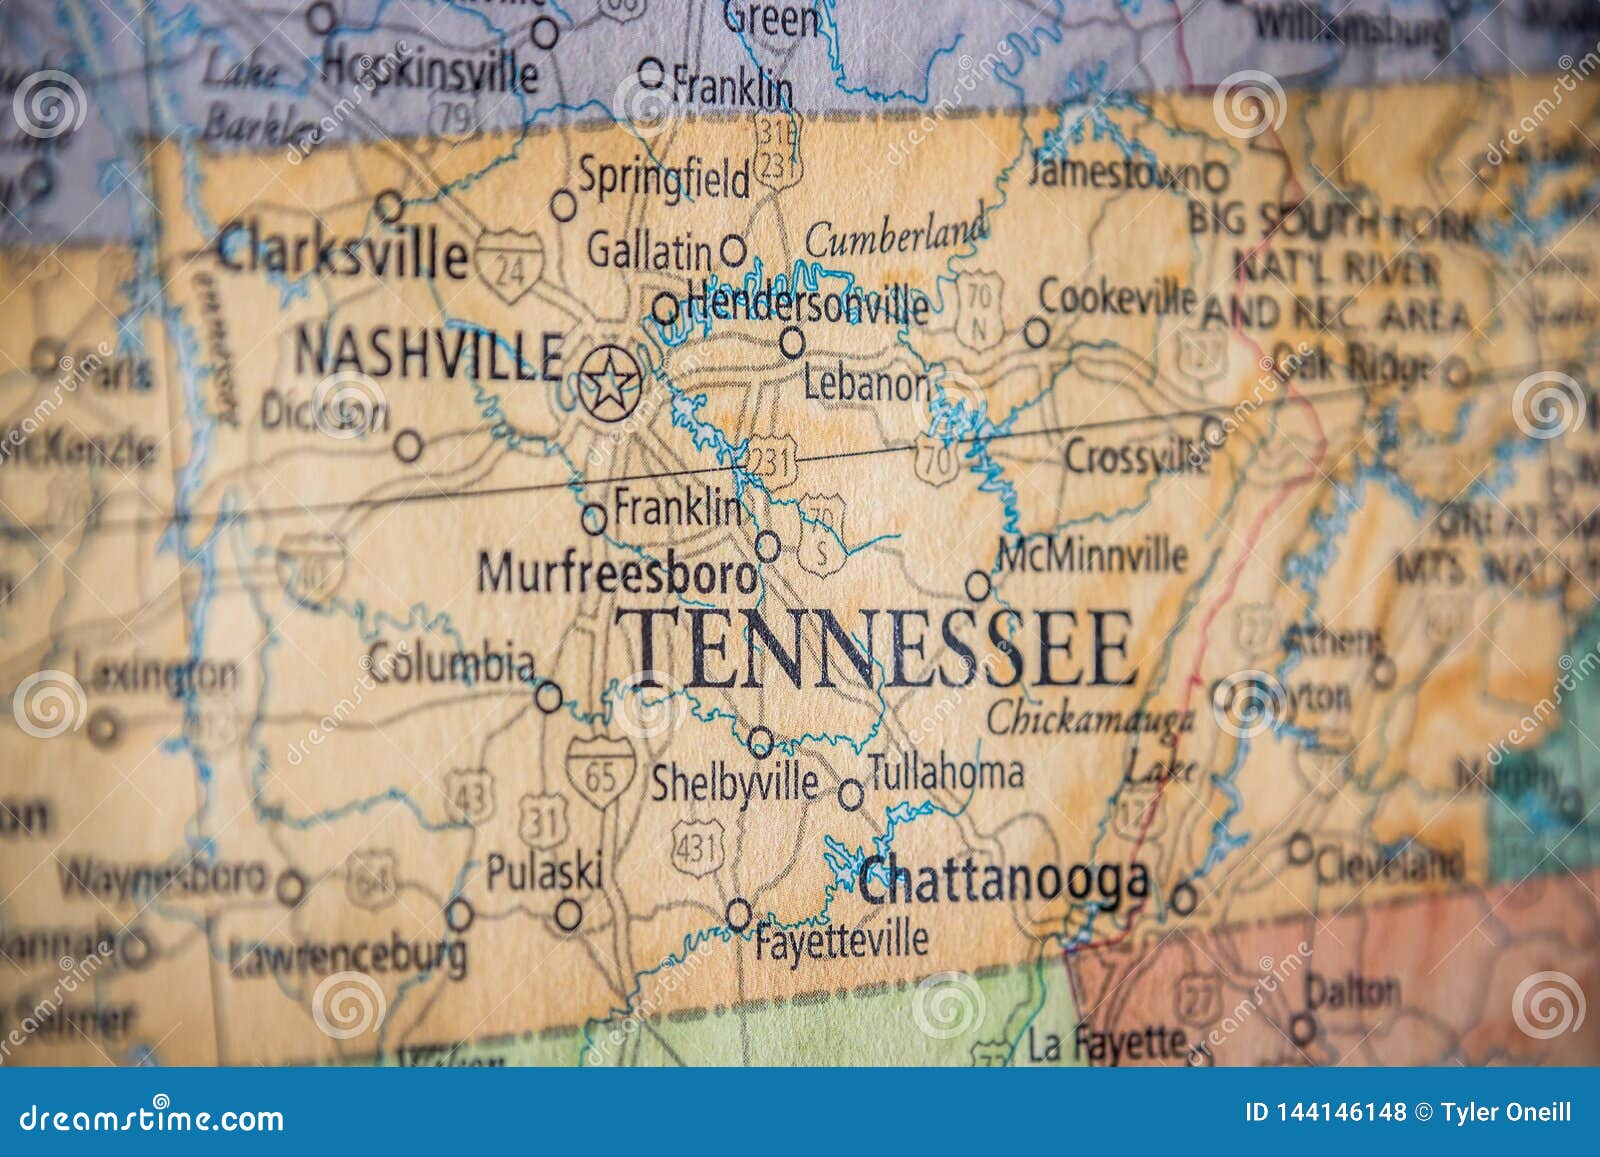 Selective Focus of Tennessee State on a Geographical and Political ...